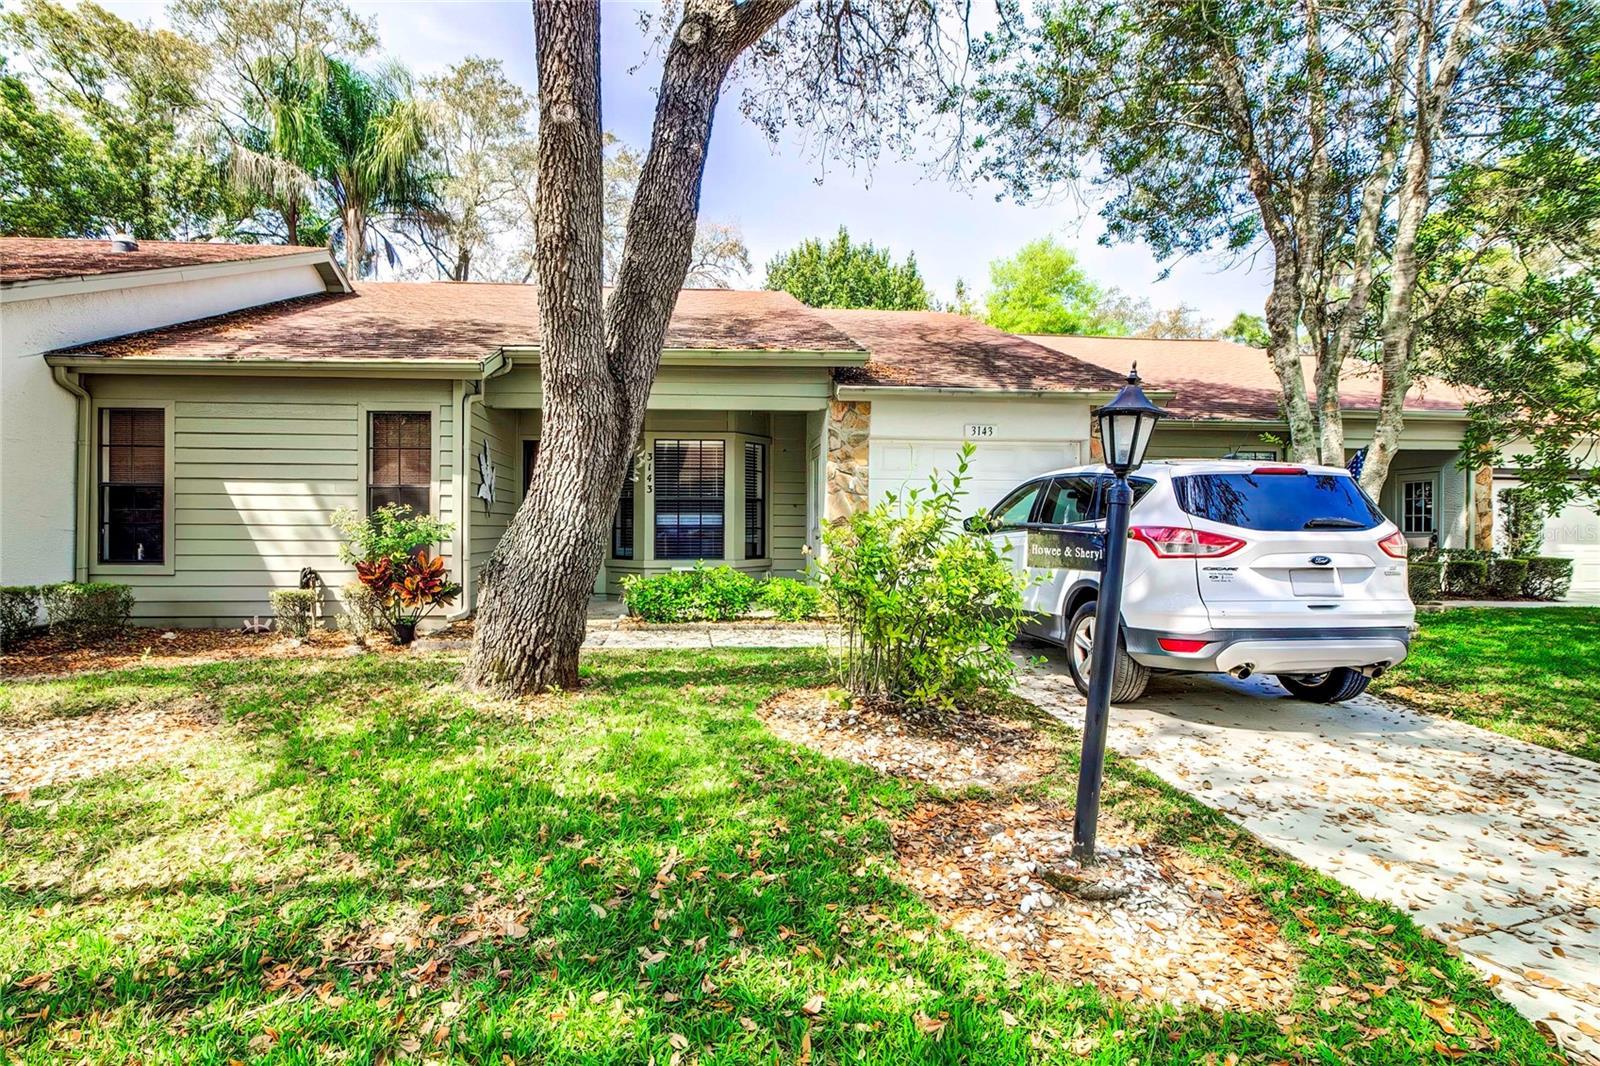 Photo one of 3143 Cloister Ct Spring Hill FL 34606 | MLS W7863716